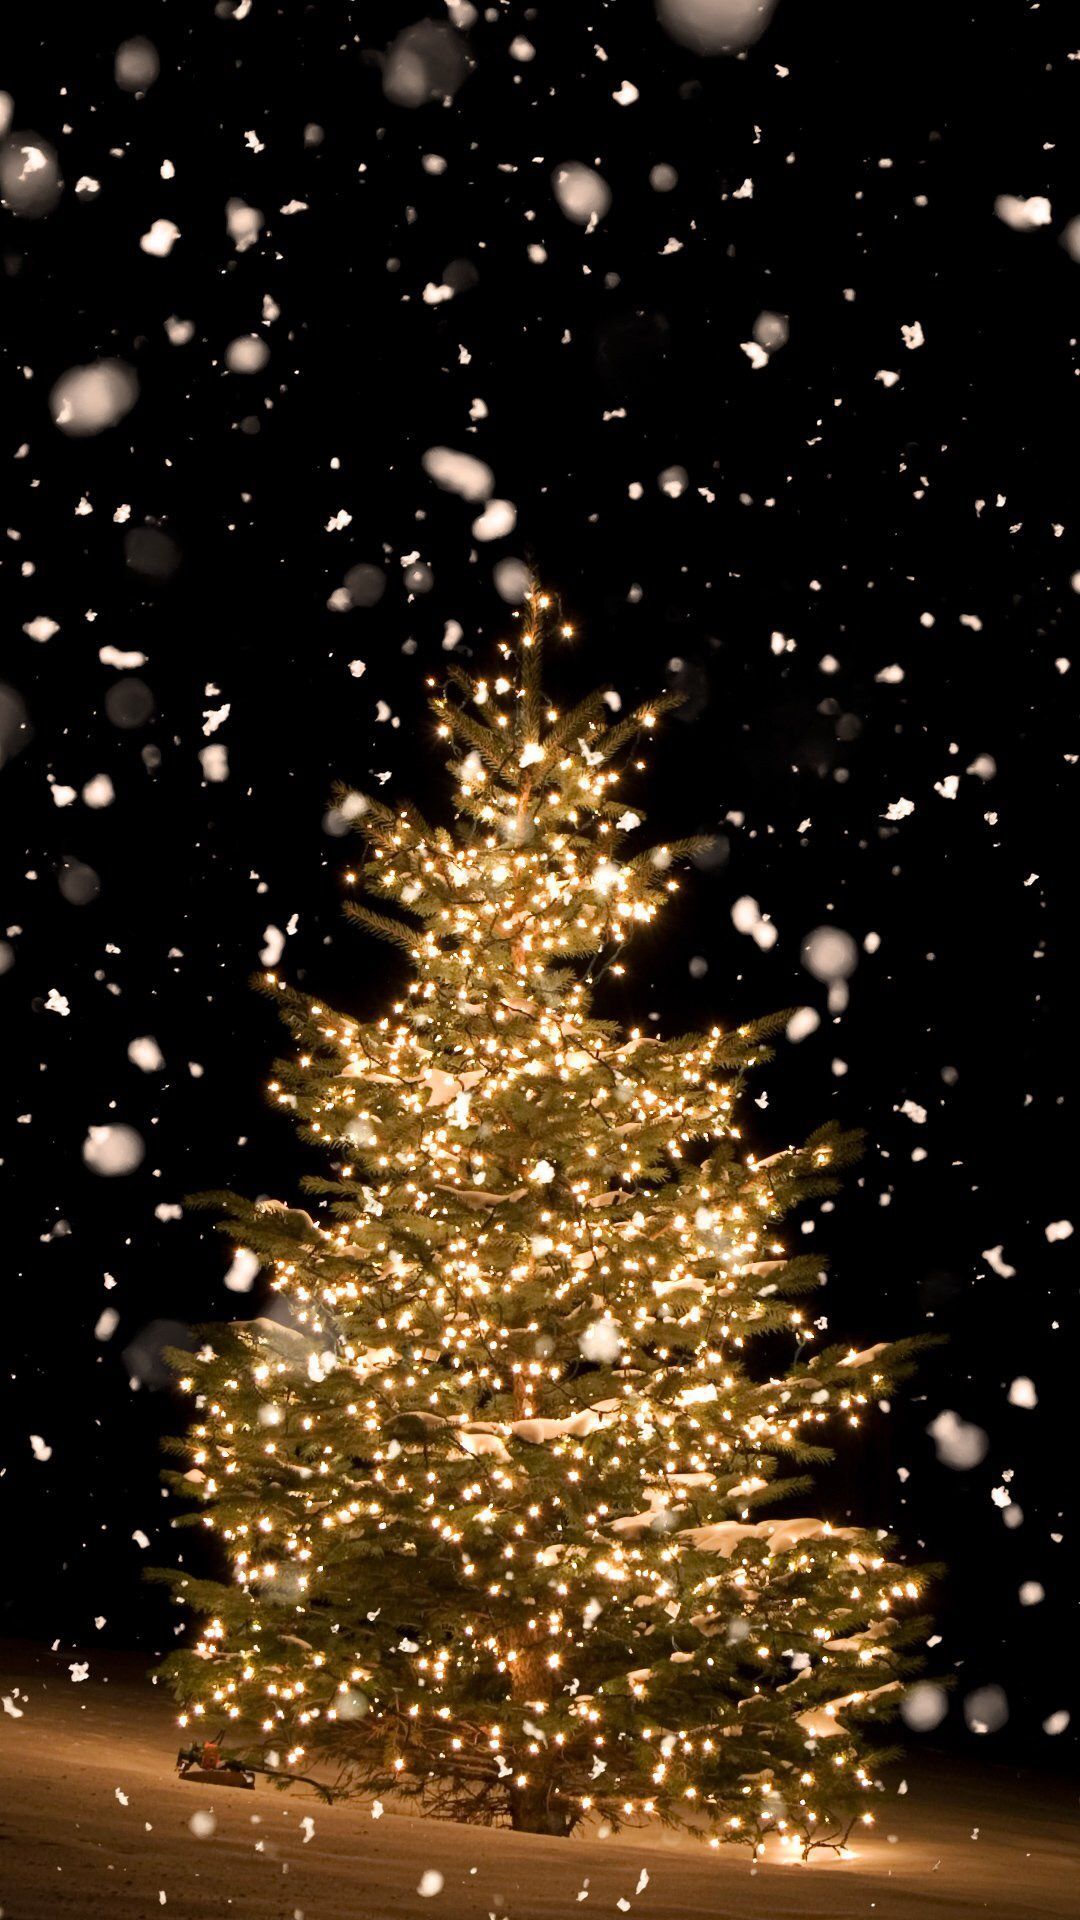 Atmospheric Perspective. Christmas phone wallpaper, Wallpaper iphone christmas, Christmas phone background